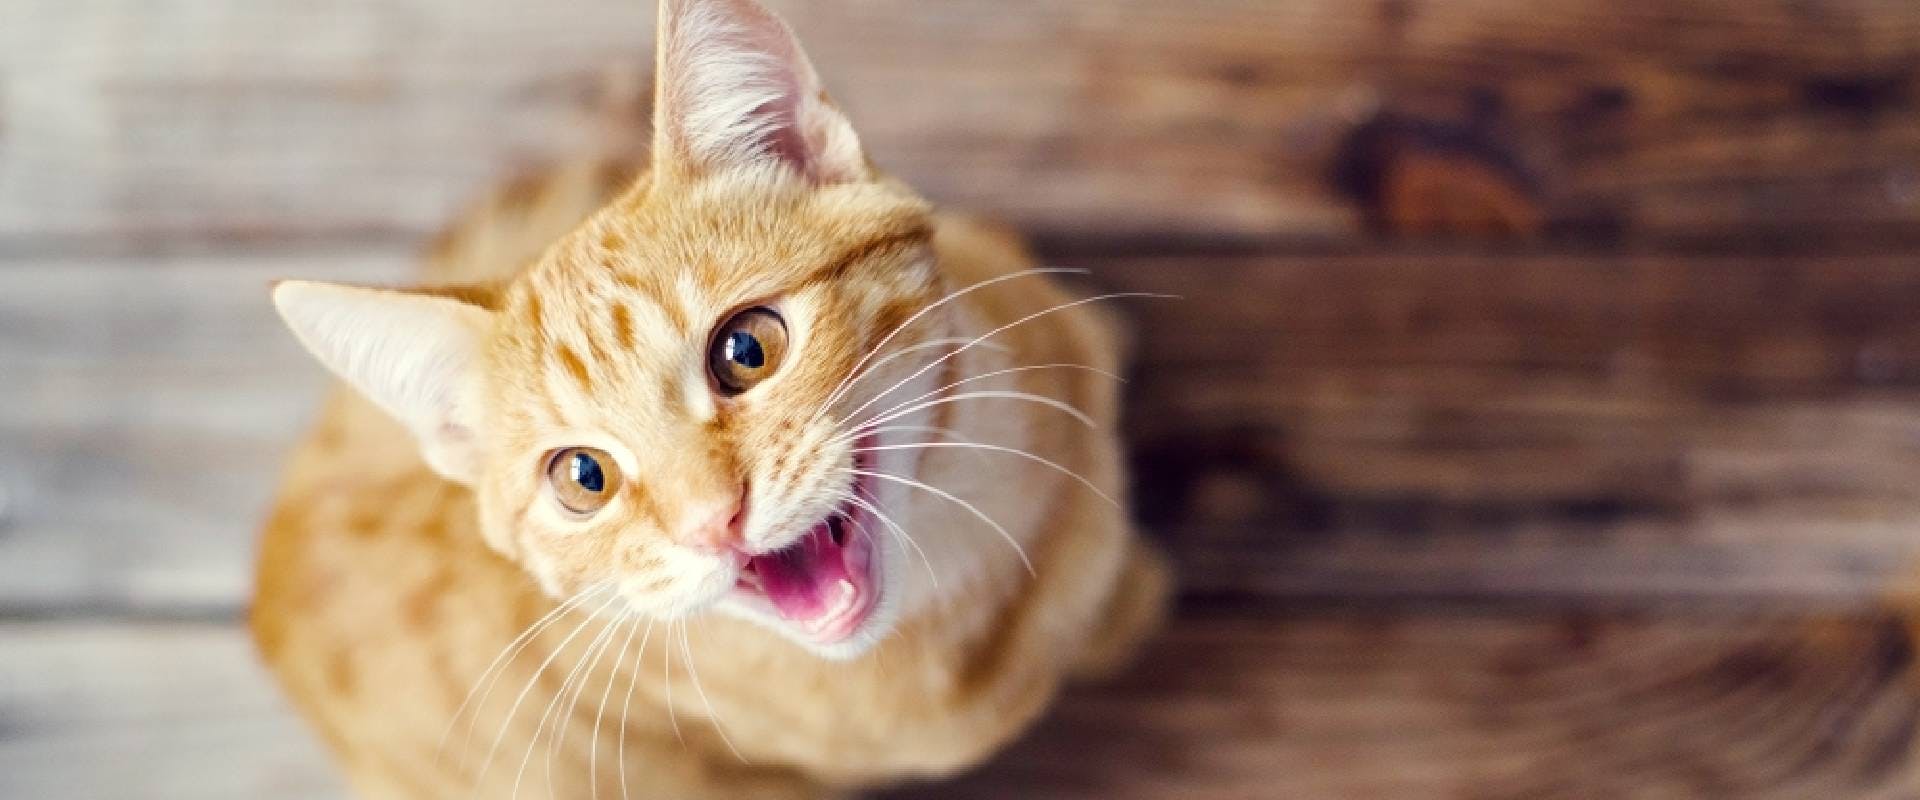 Ginger cat meowing